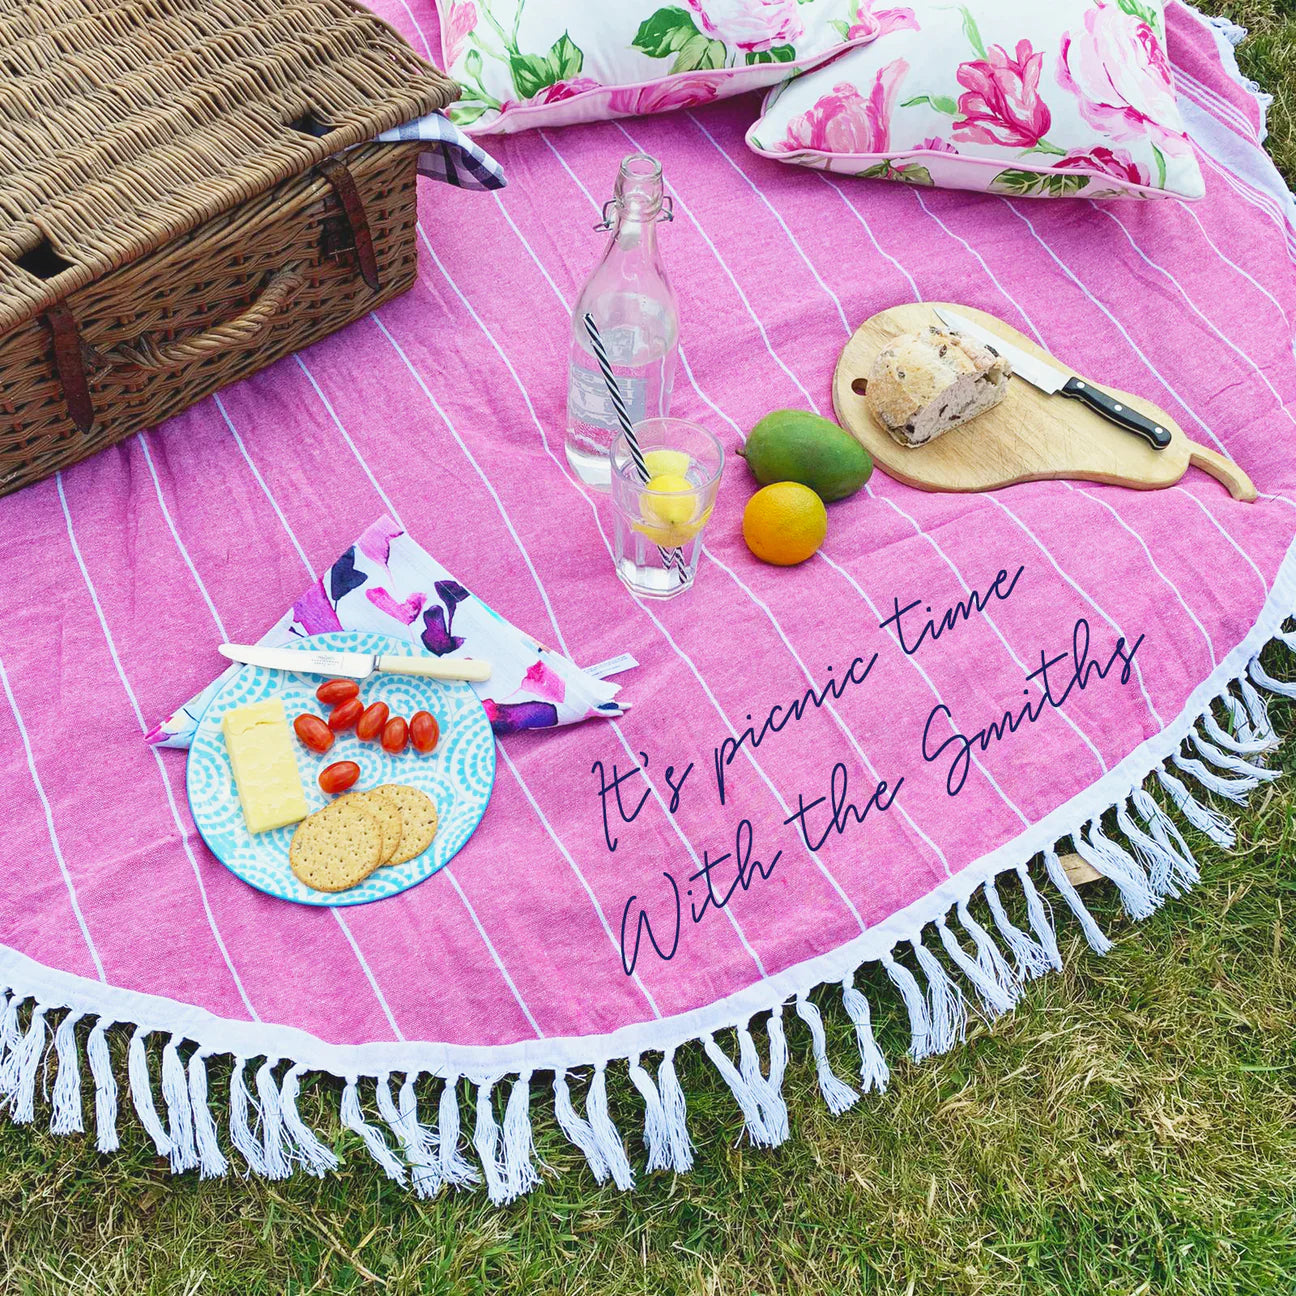 Personalised Round Pink Picnic